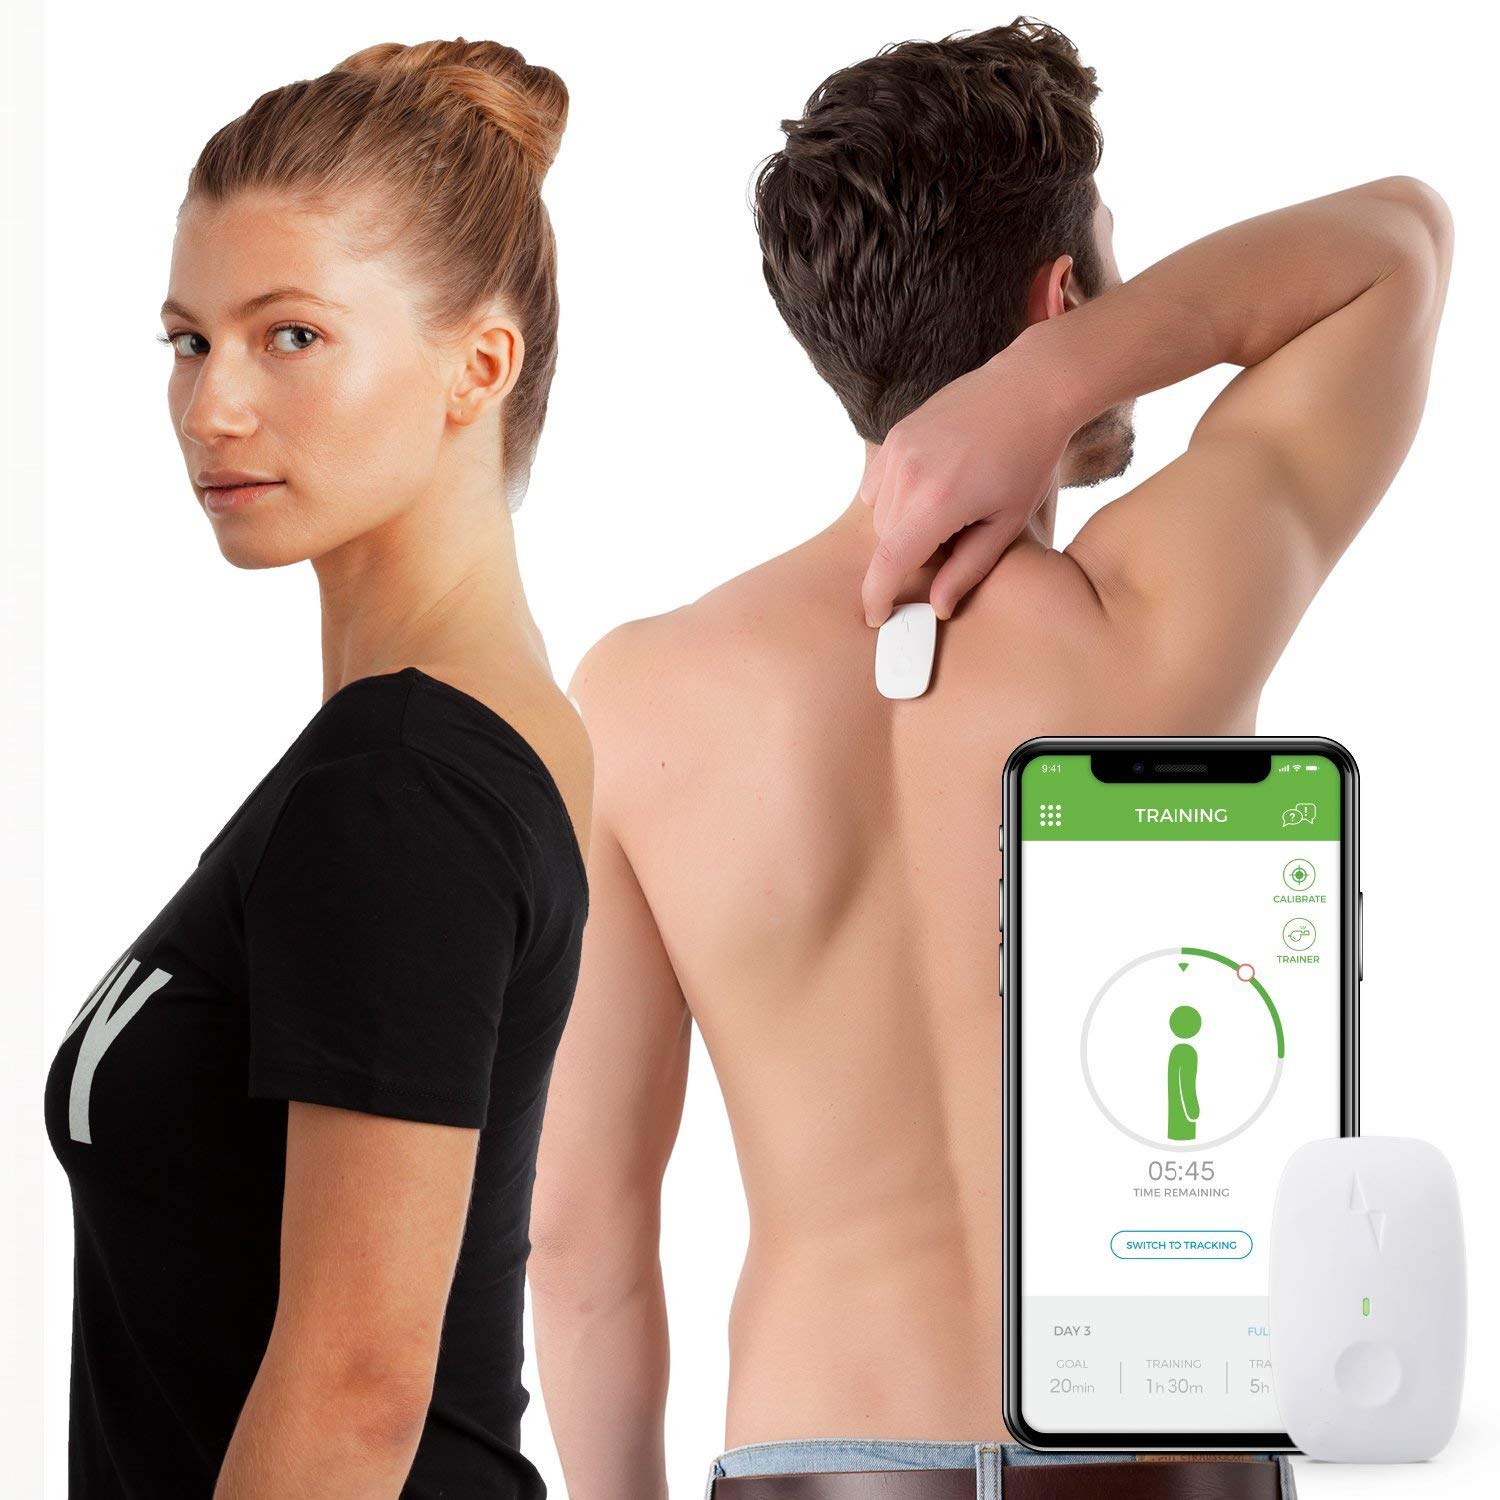 Upright GO Posture Trainer and Corrector for Back | Strapless, Discrete, Easy to Use | Complete with App and Training Plan | Back Health Benefits and 2